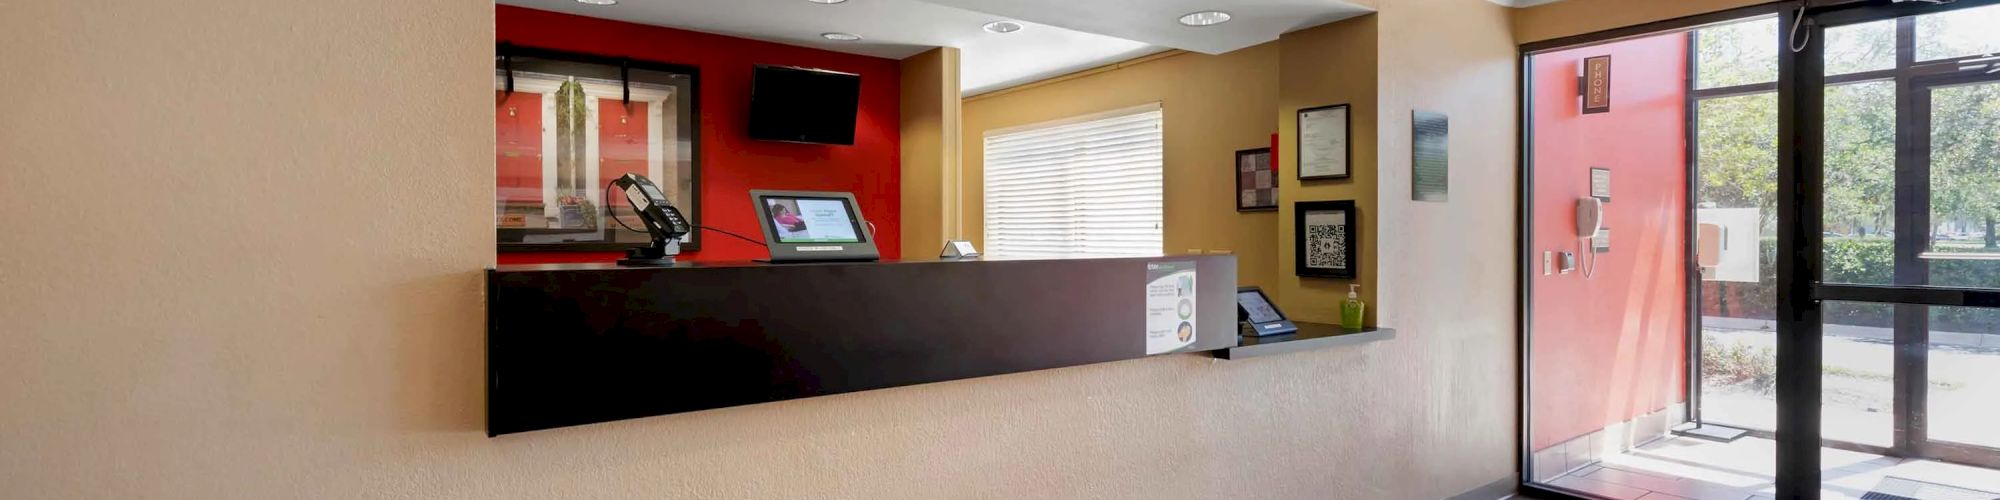 This image shows a reception desk area with a computer, some framed pictures, and a glass entrance door to the right.